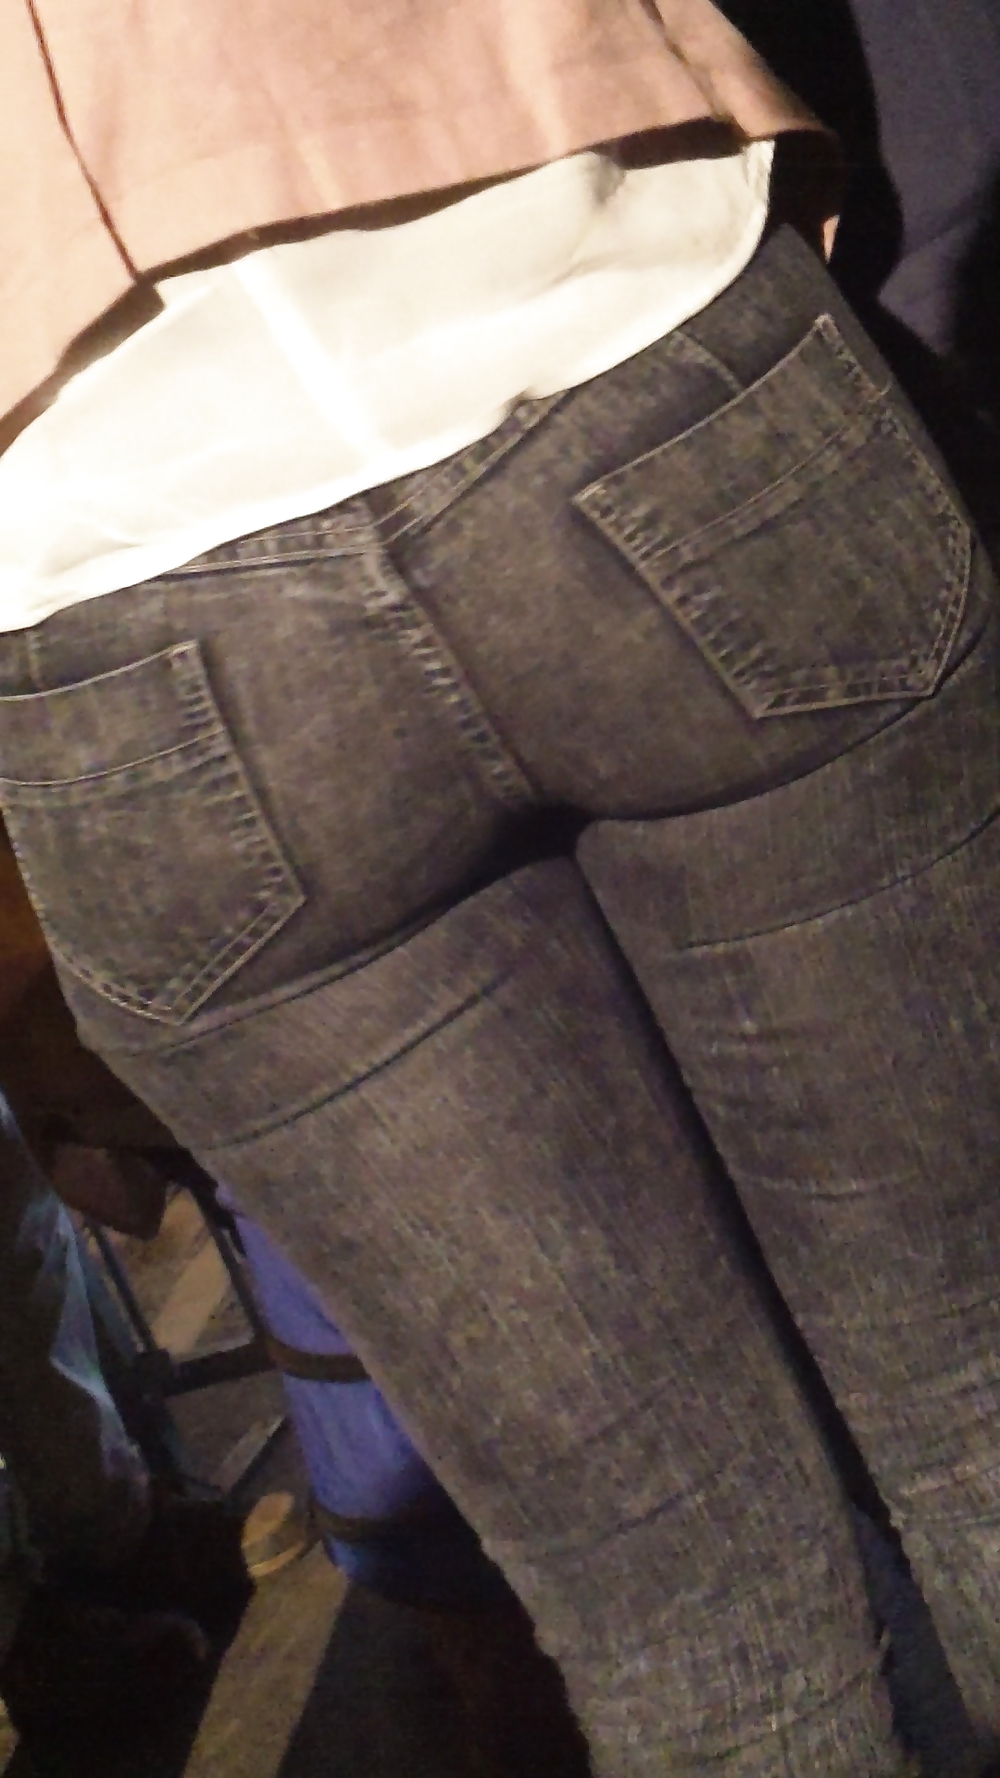 Tight teen butts & ass in jeans up close  #20661036